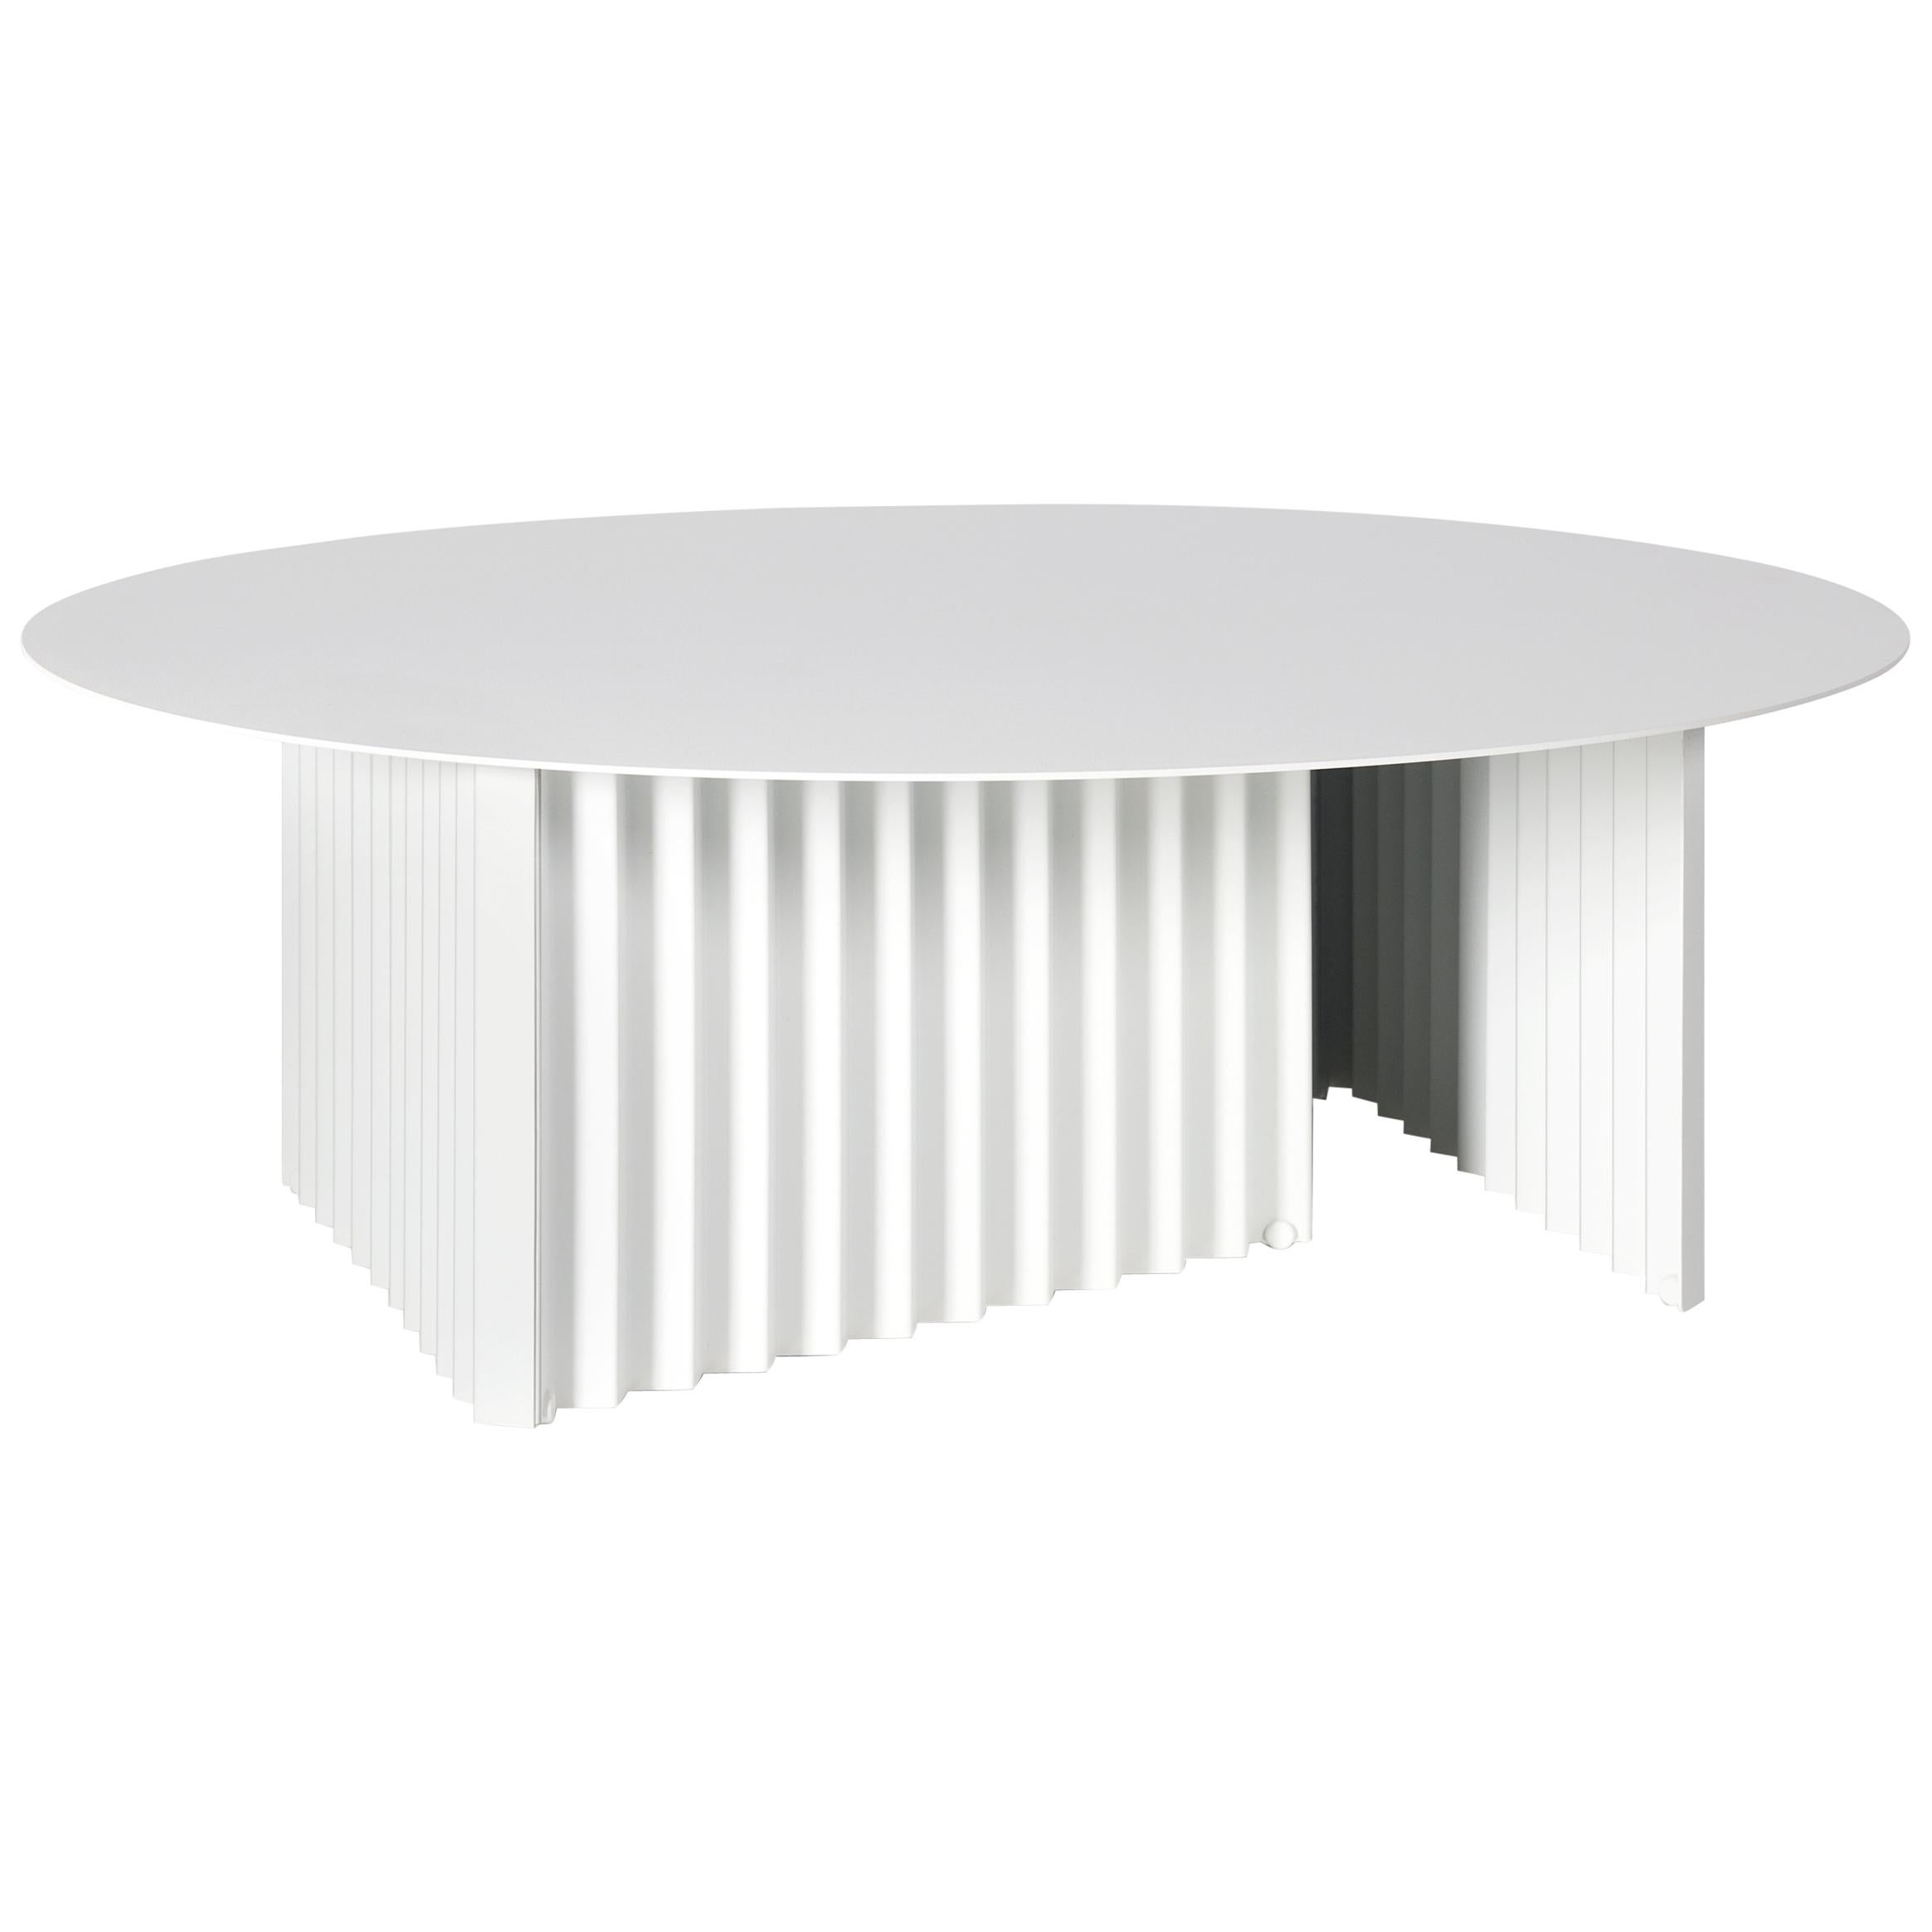 RS Barcelona Plec Round Large Table in White Metal by A.P.O.